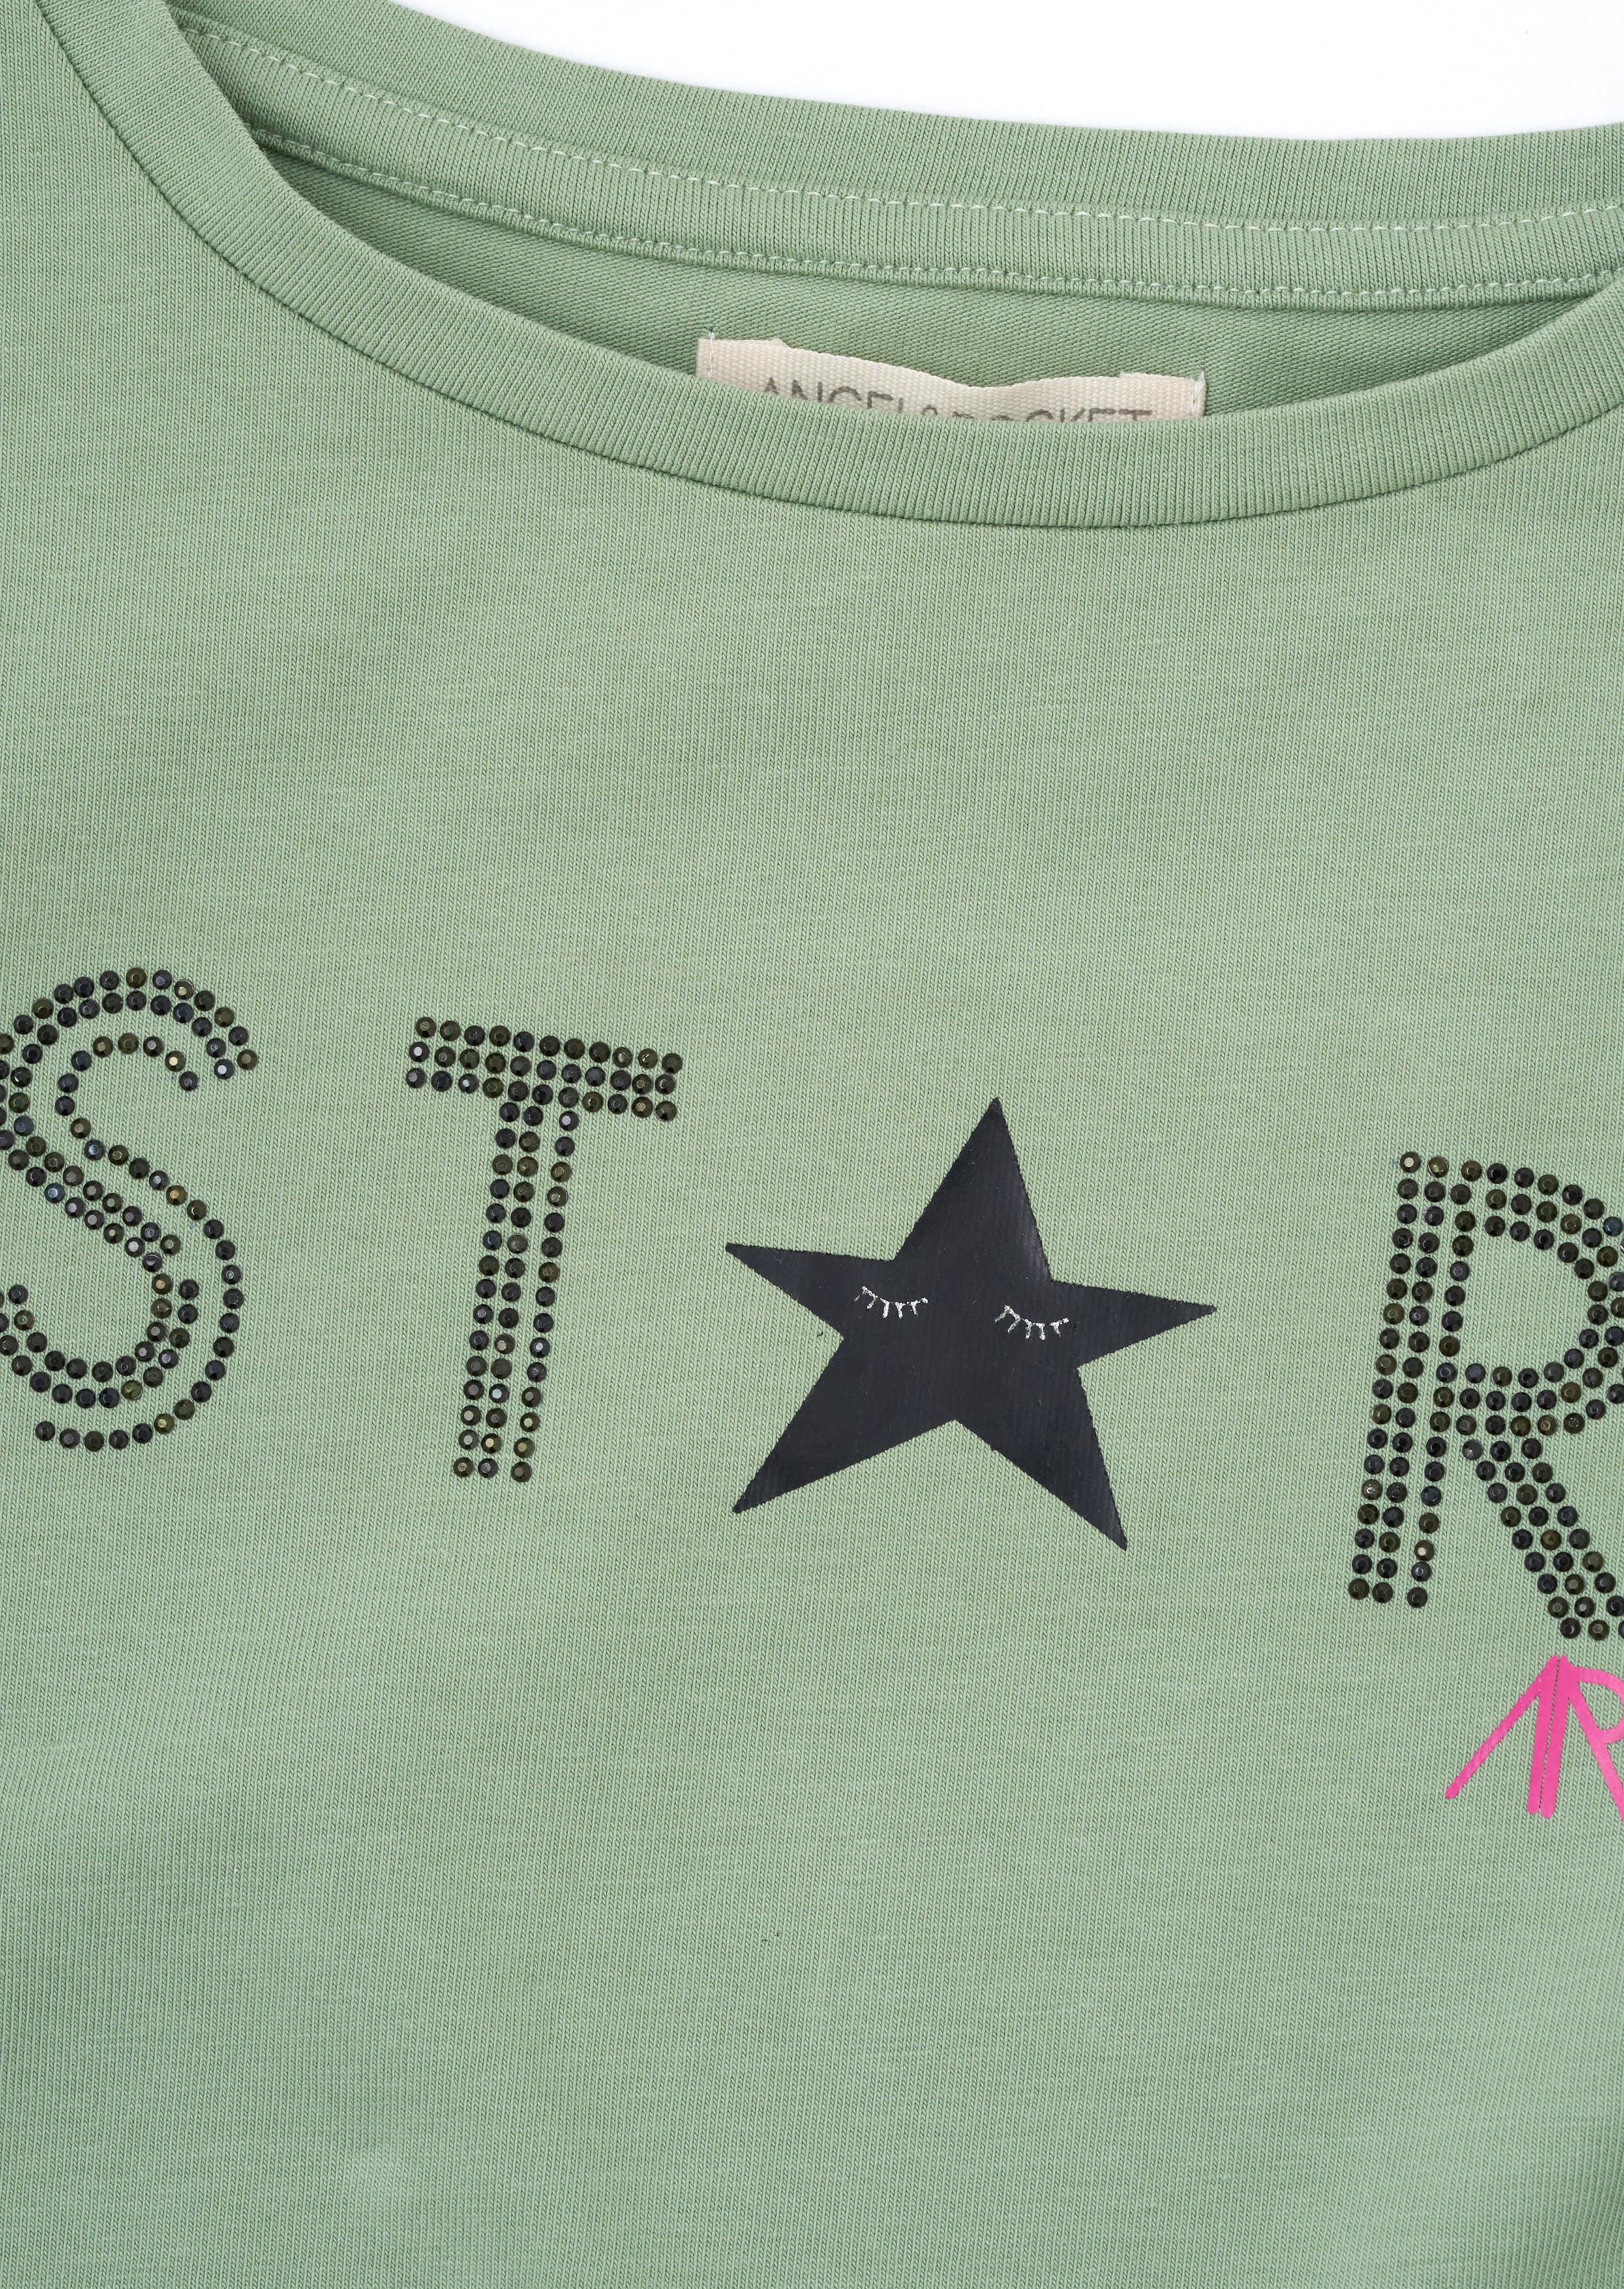 Girls Frill Sleeves with Star Printed Green Top